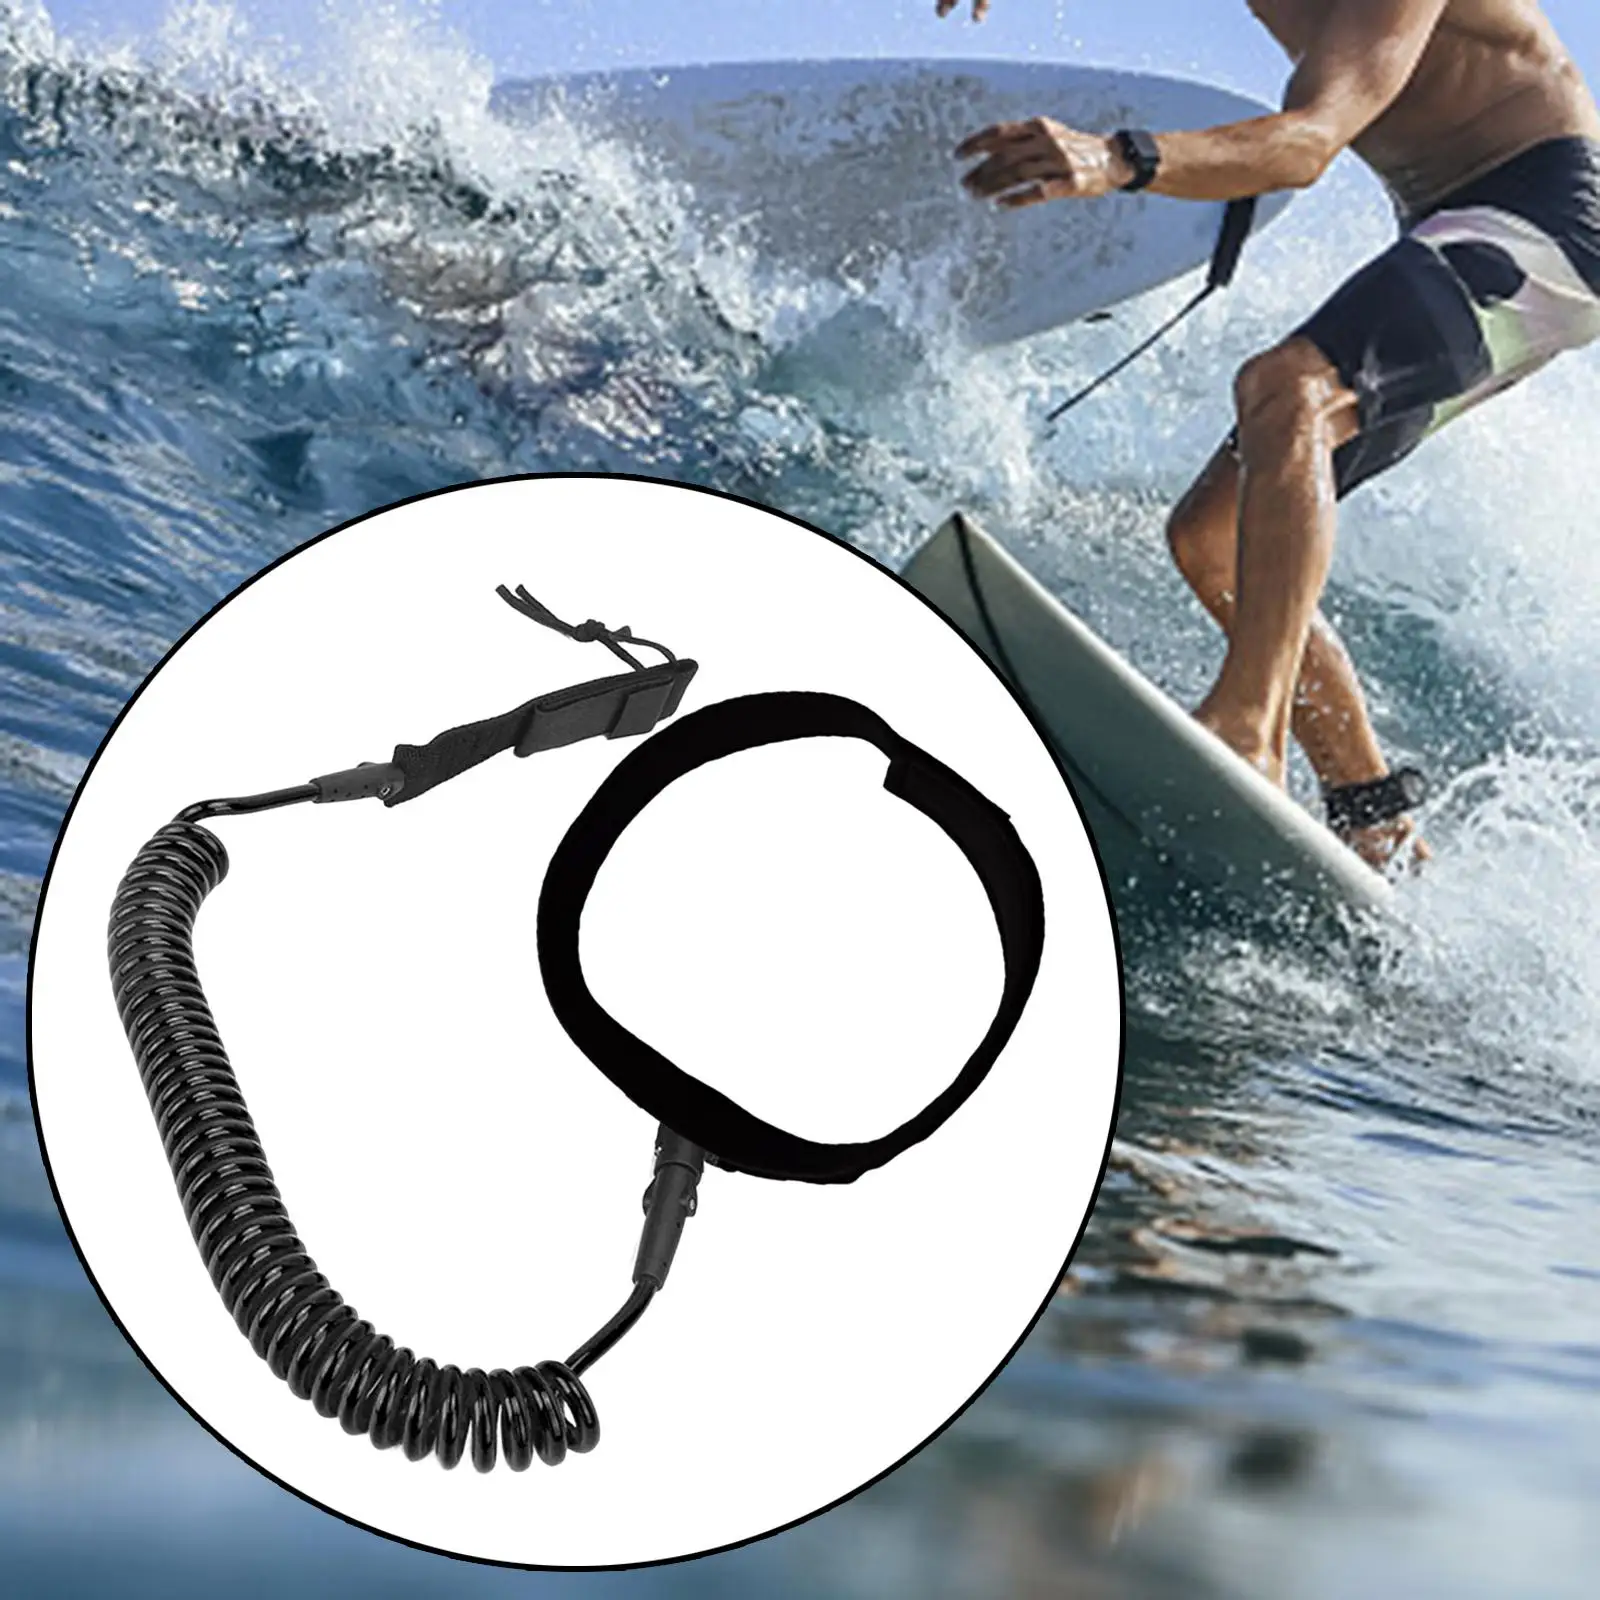 Surfboard Leash Adjustable Surfing Safety Waist Rope for Kids Adult Surf Leash Surfing Leash for Outdoor Paddleboard Longboard